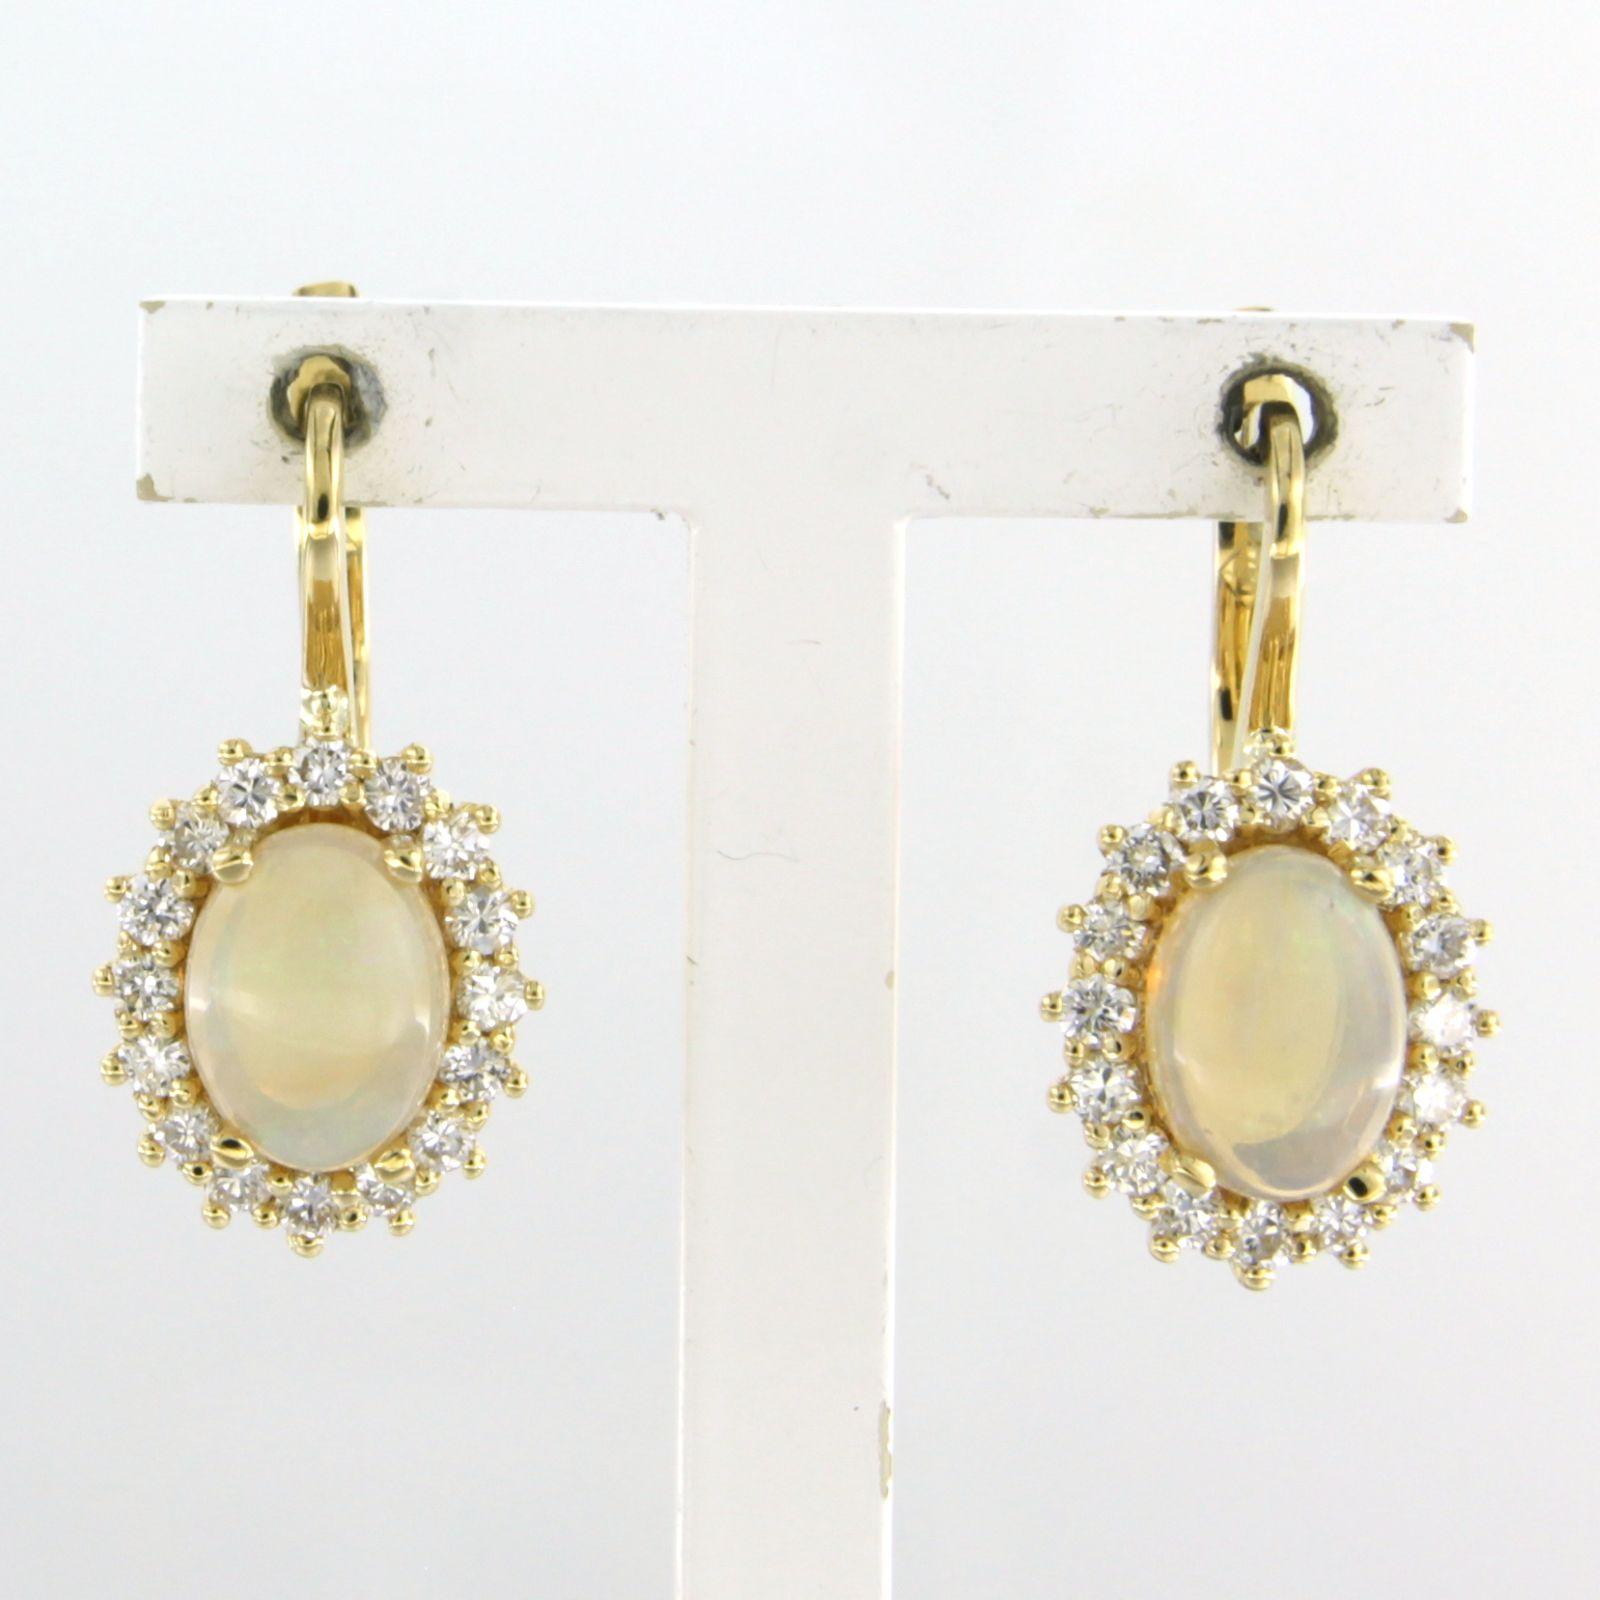 18k yellow gold earrings set with opal 1.80 ct and brilliant cut diamond 0.58 ct F/G VS/SI

Detailed description:

The earrings are 2.0 cm high and 1.0 cm wide

Total weight 5.4 grams

set with

- 2 x 8.0 mm x 6.0 mm oval cut opal

color: green,